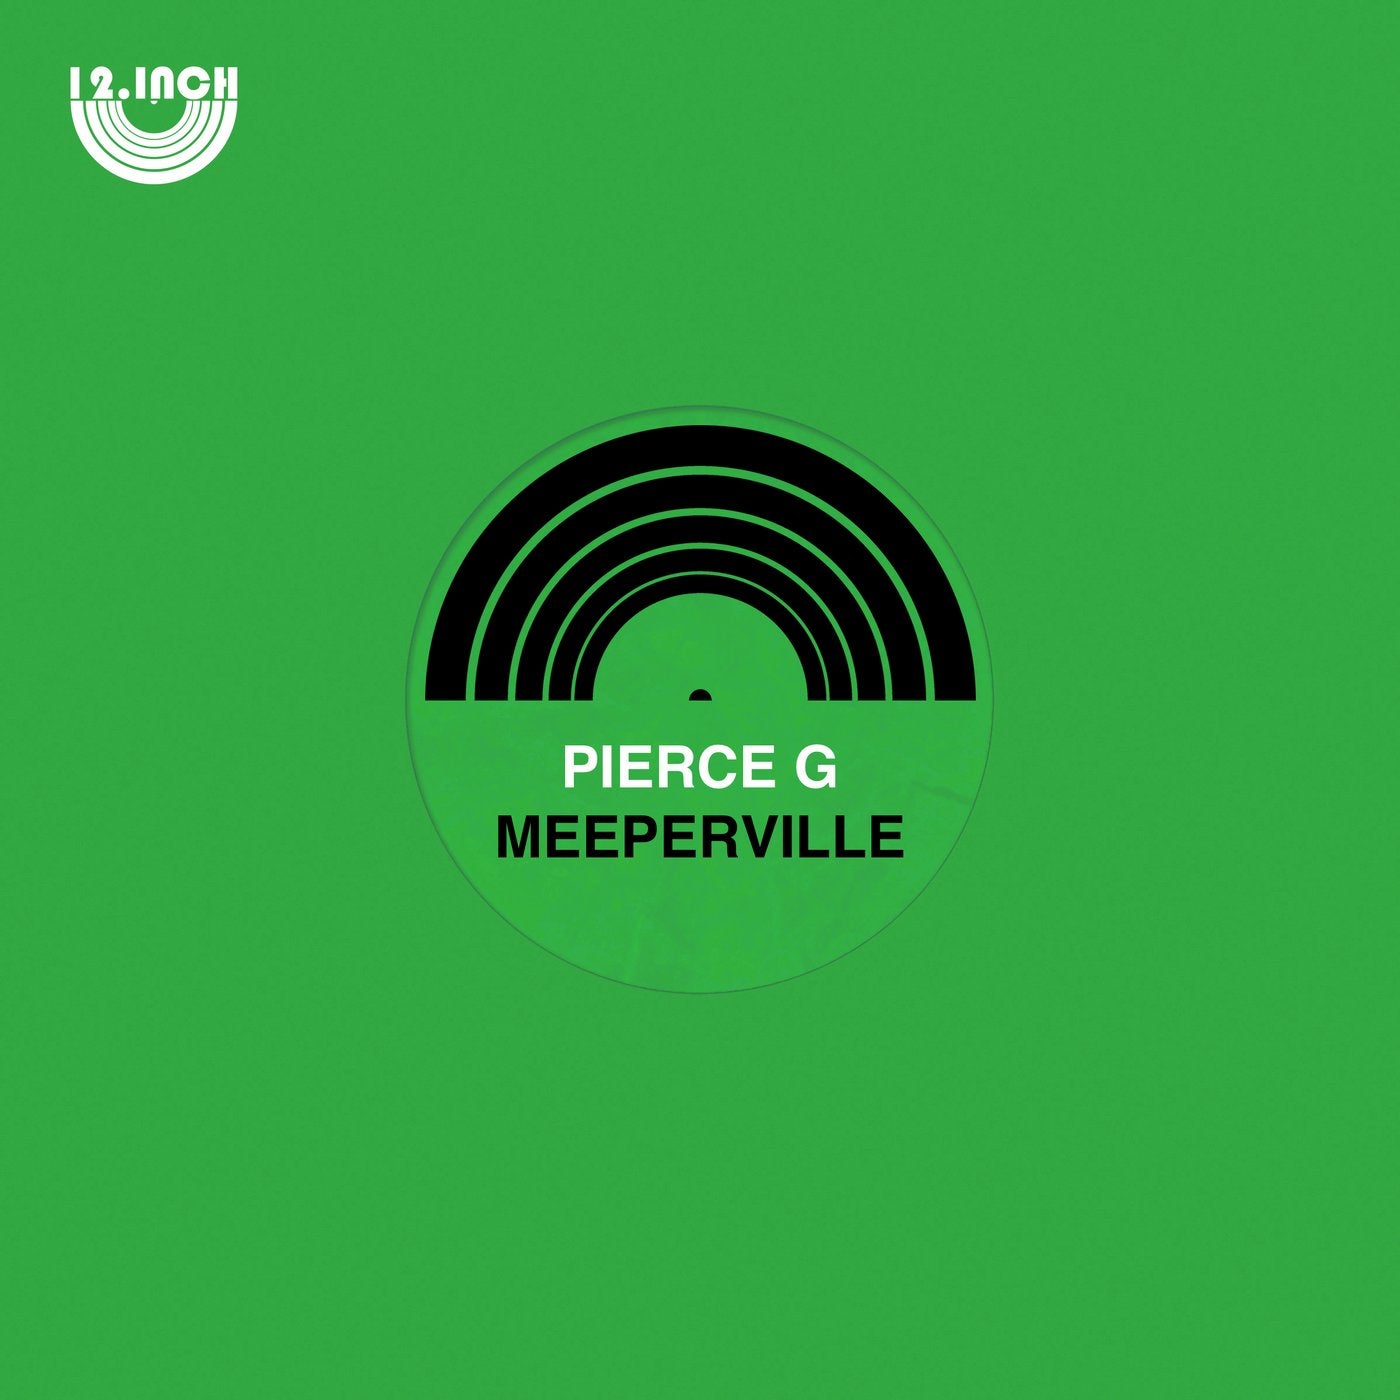 Meeperville